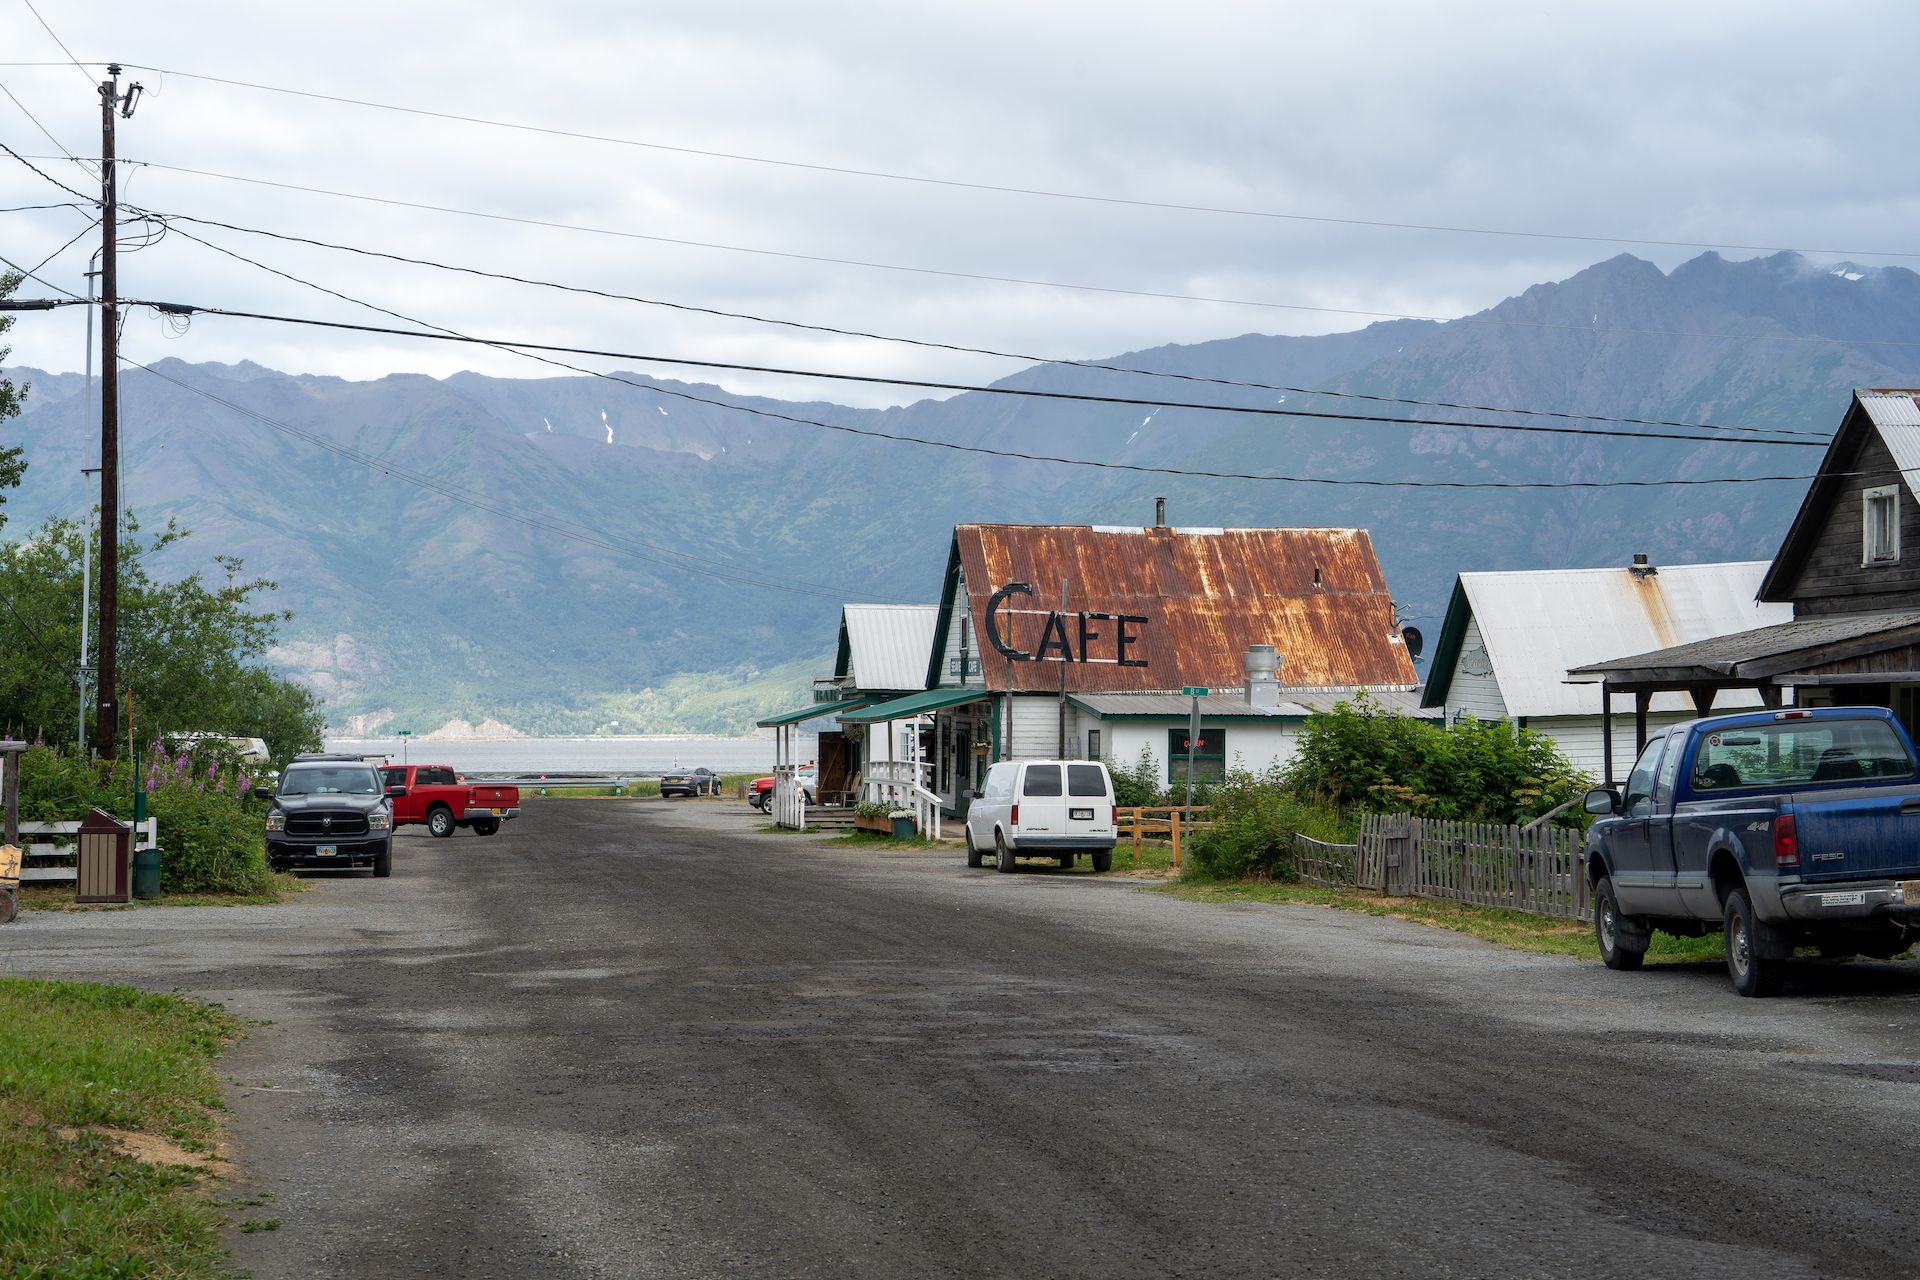 Seaview Cafe in Hope, AK with the campground in the back